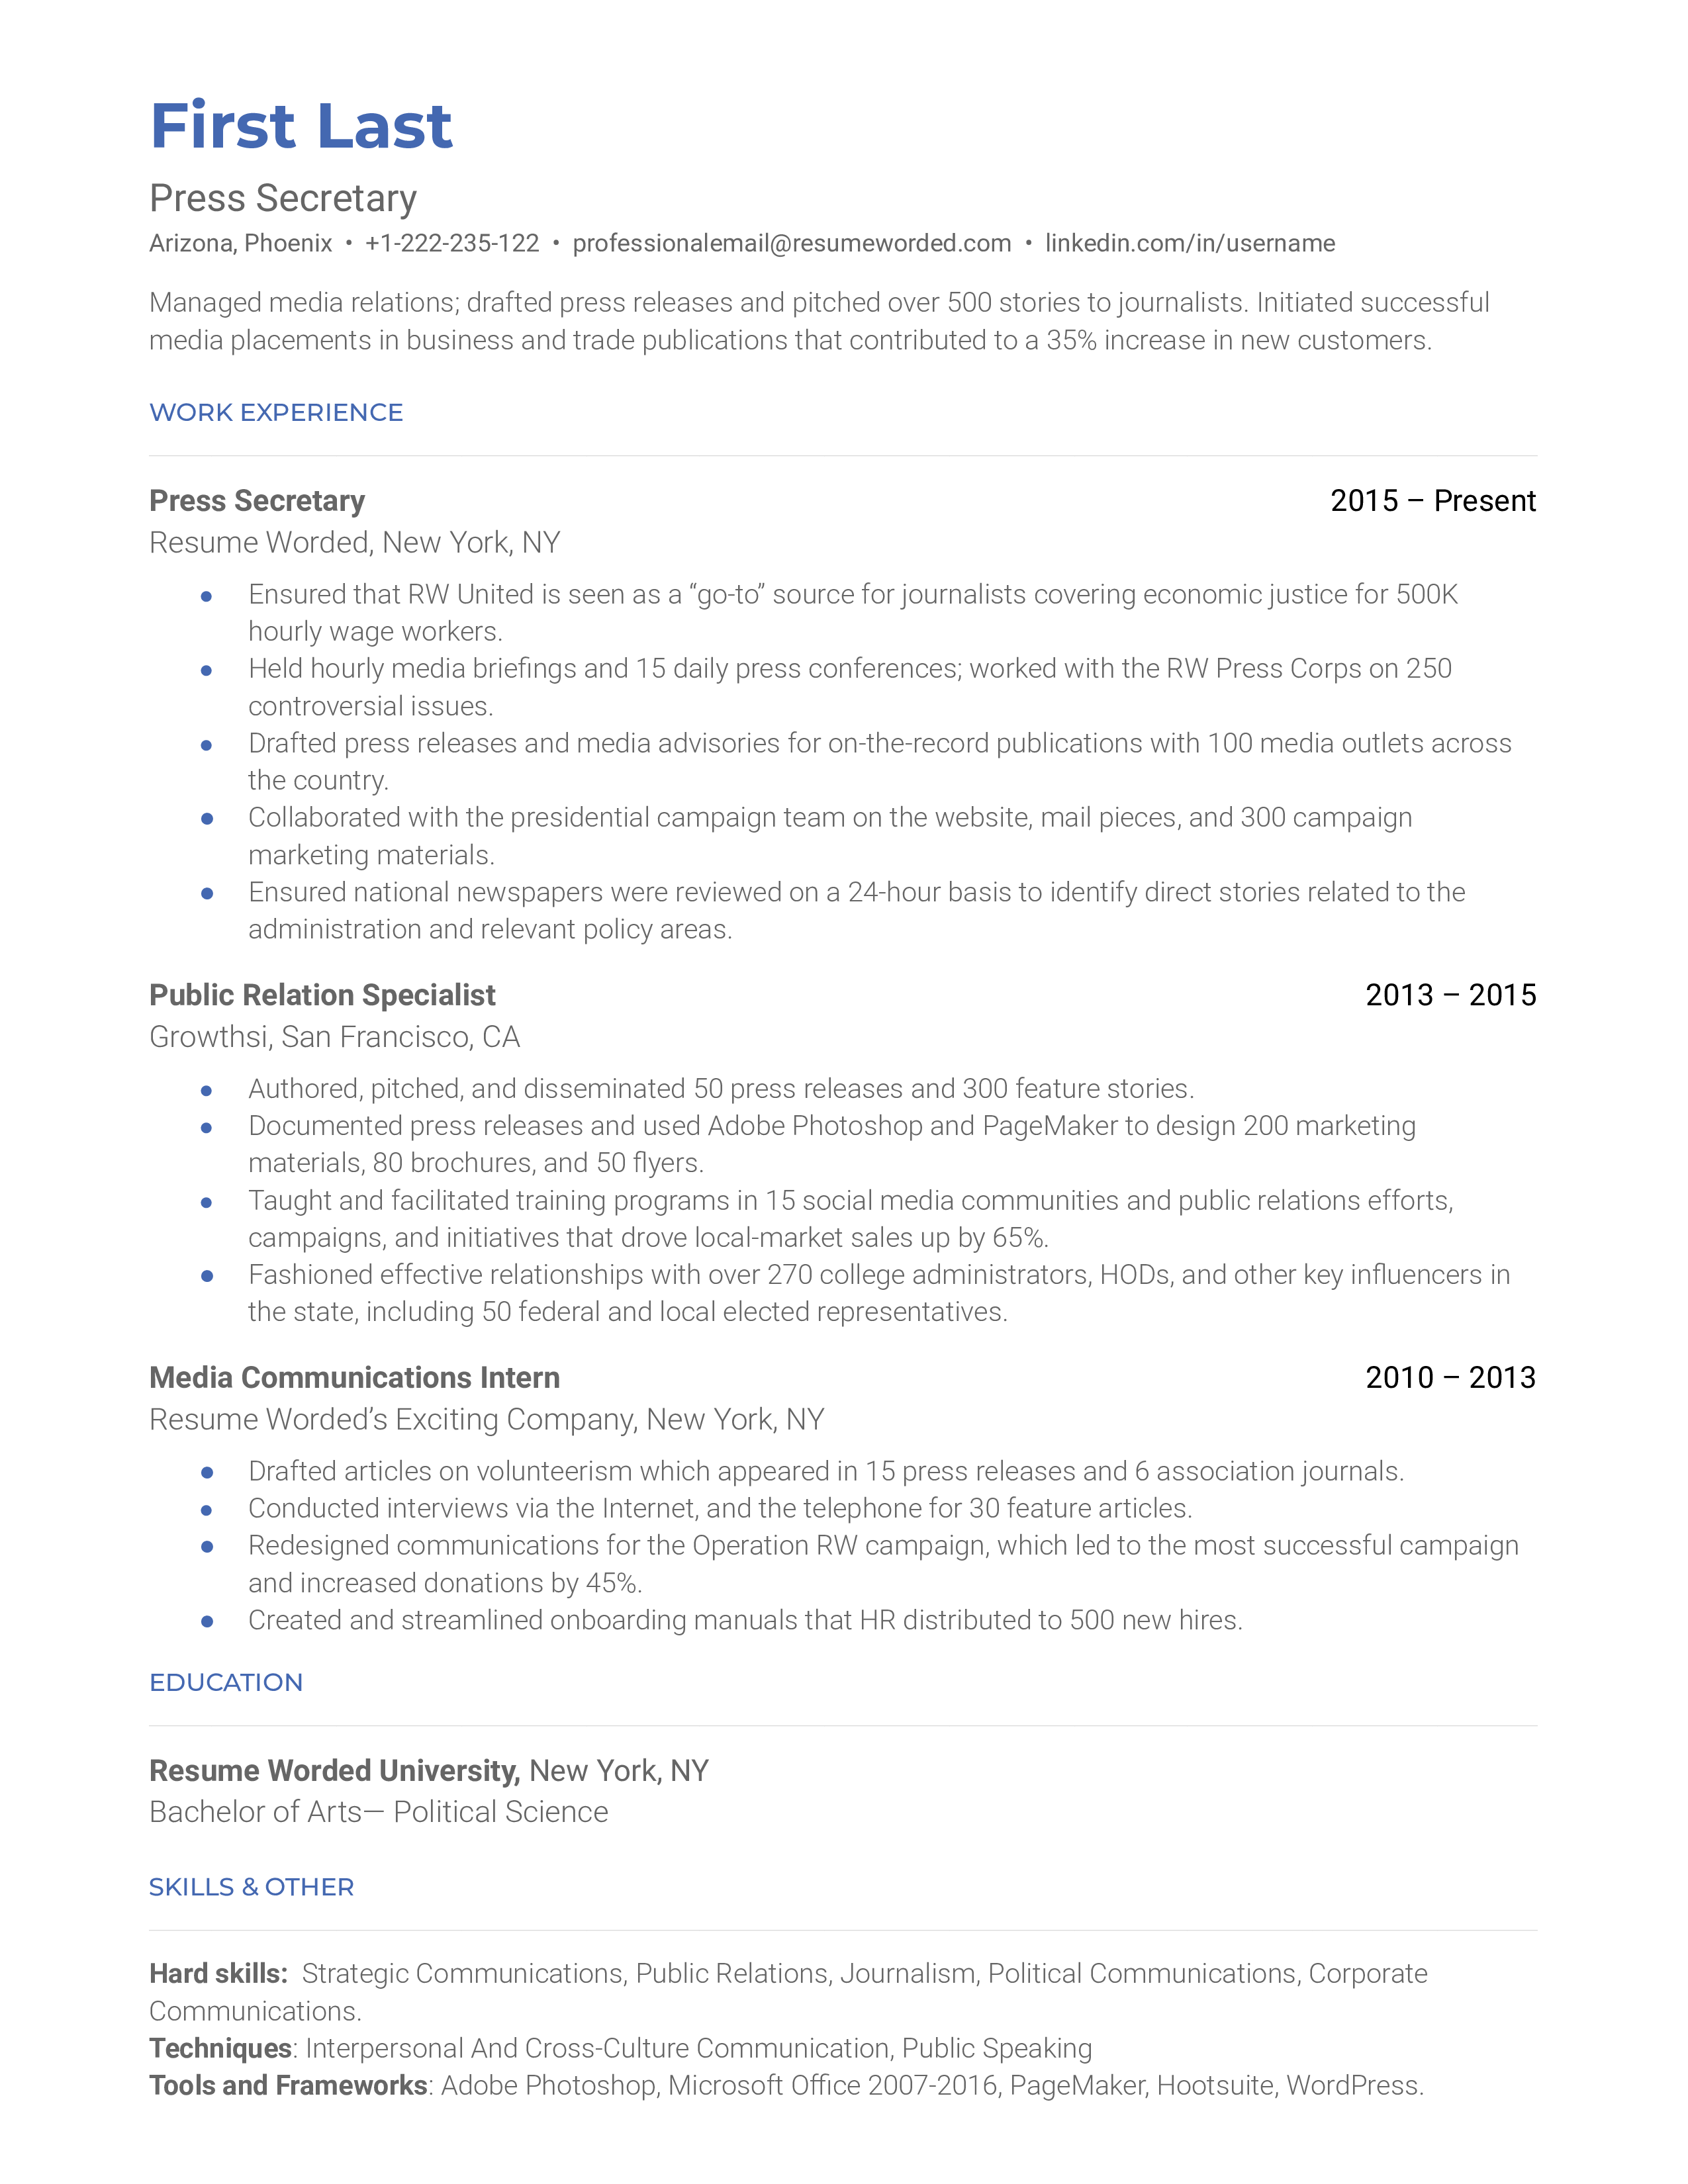 A press secretary resume that highlights experience representing government agencies to enhance their public image 